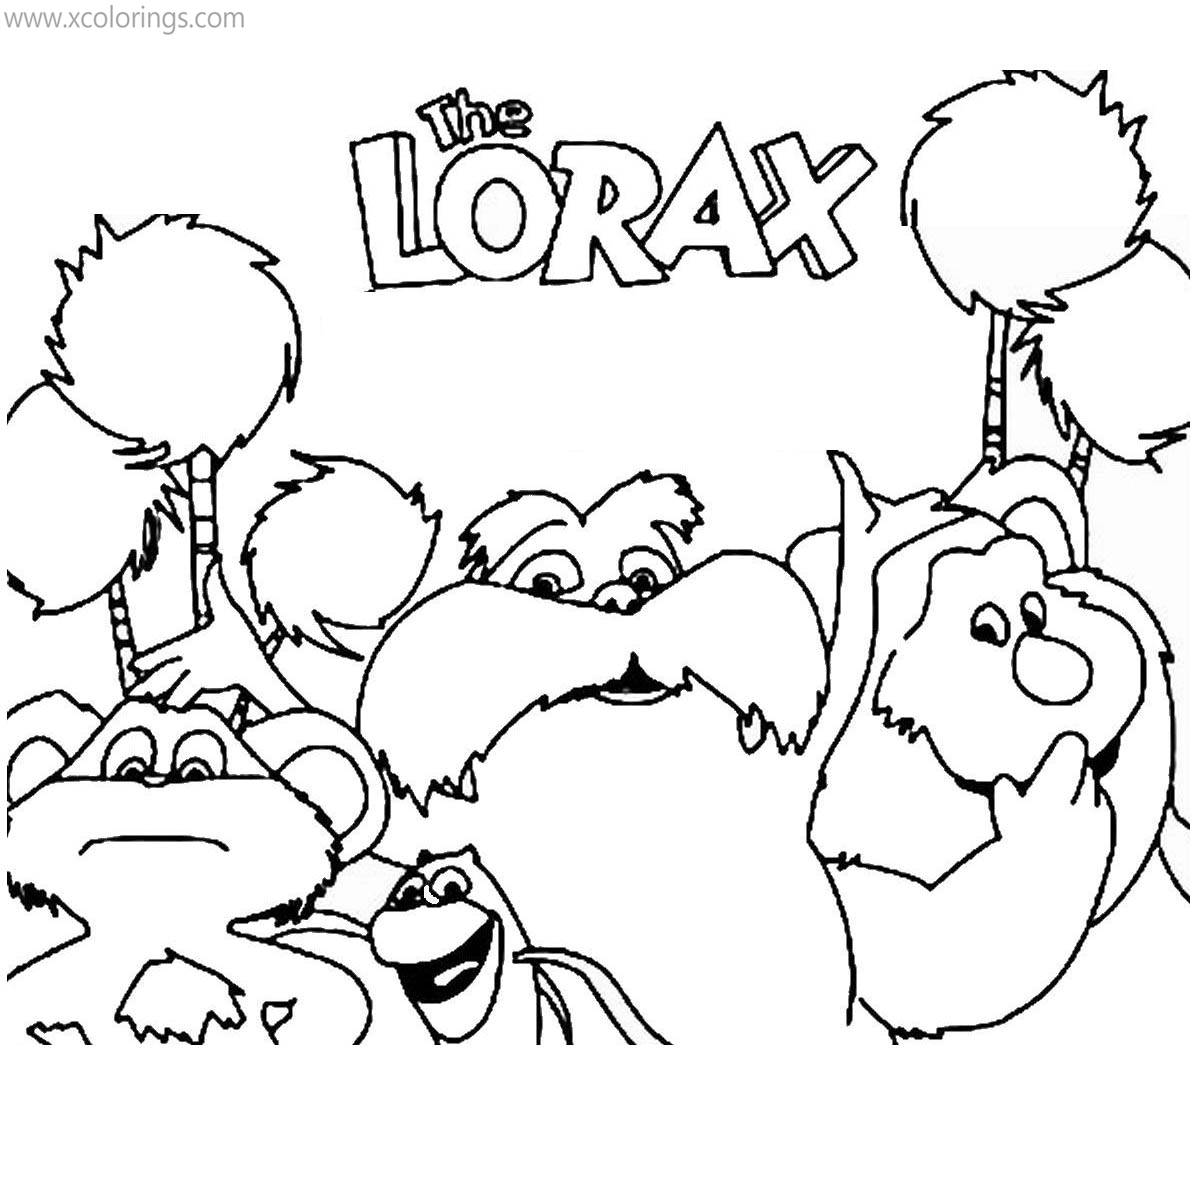 Free Lorax Characters Coloring Pages with Trees printable